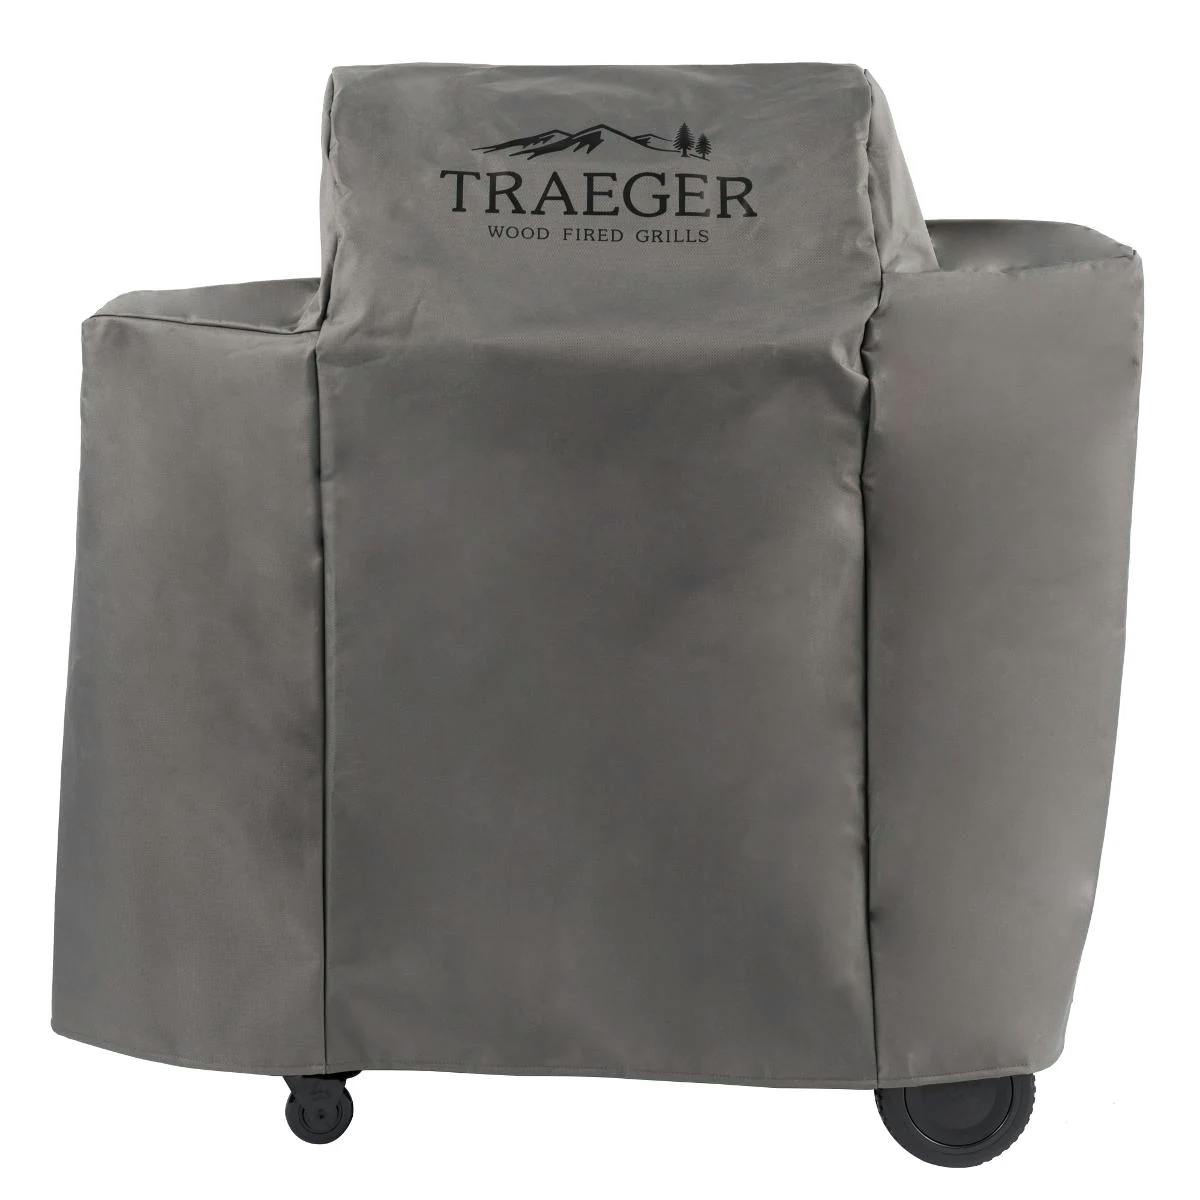 Traeger Full Length Grill Cover For Ironwood 650 Series Pellet Grills